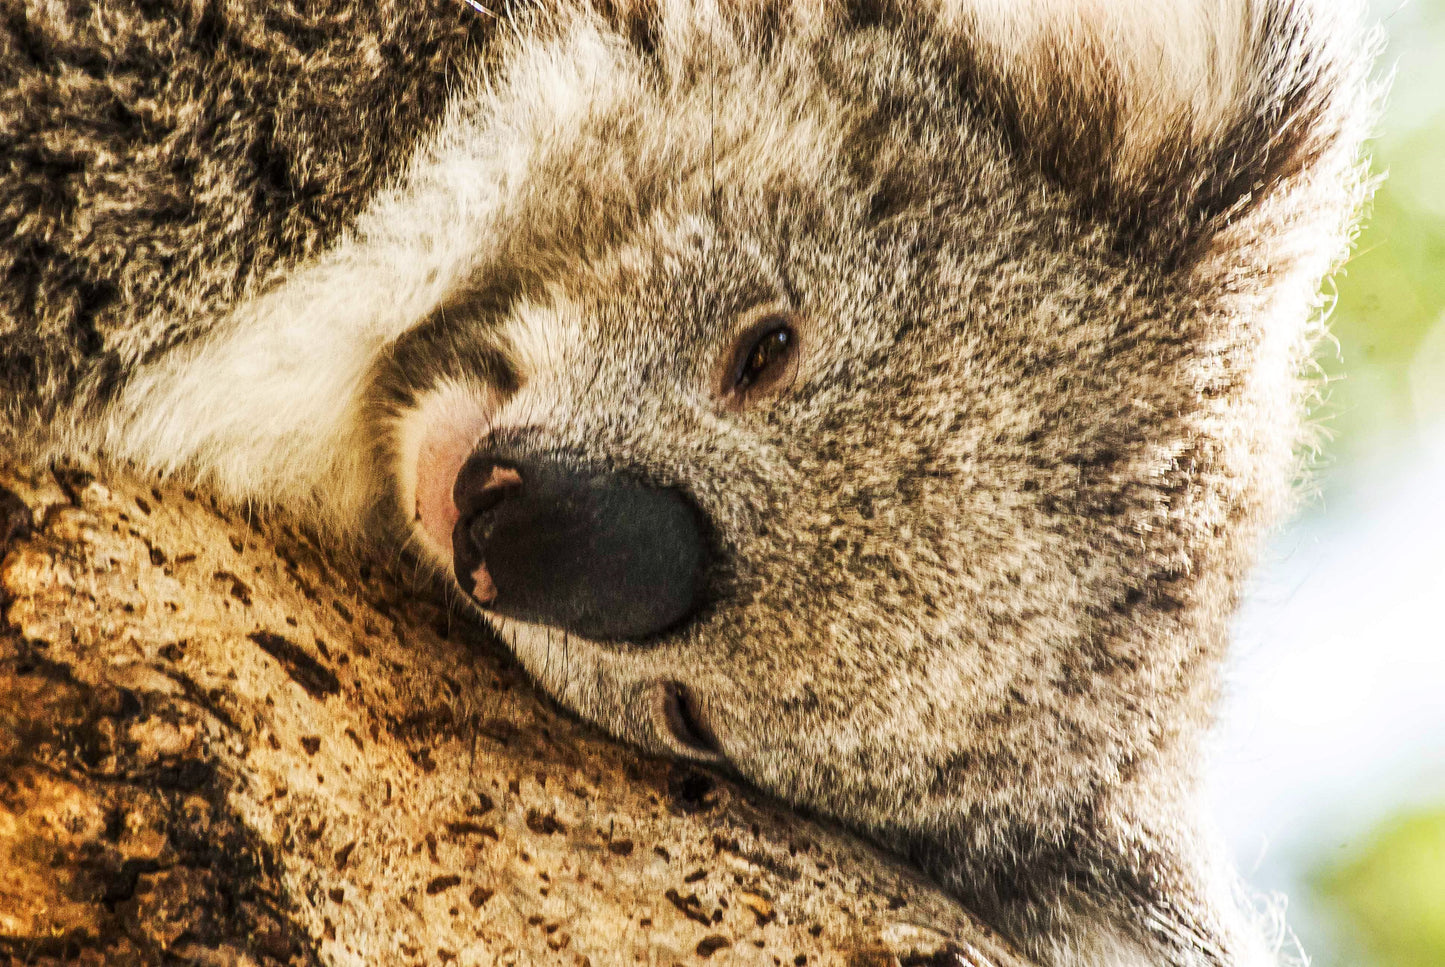 Alessandra Mattanza | LOST IN A DREAM, Australia. A dozing Koala lounges on its favorite branch. Available as an art print or photographic print on acrylic glass.